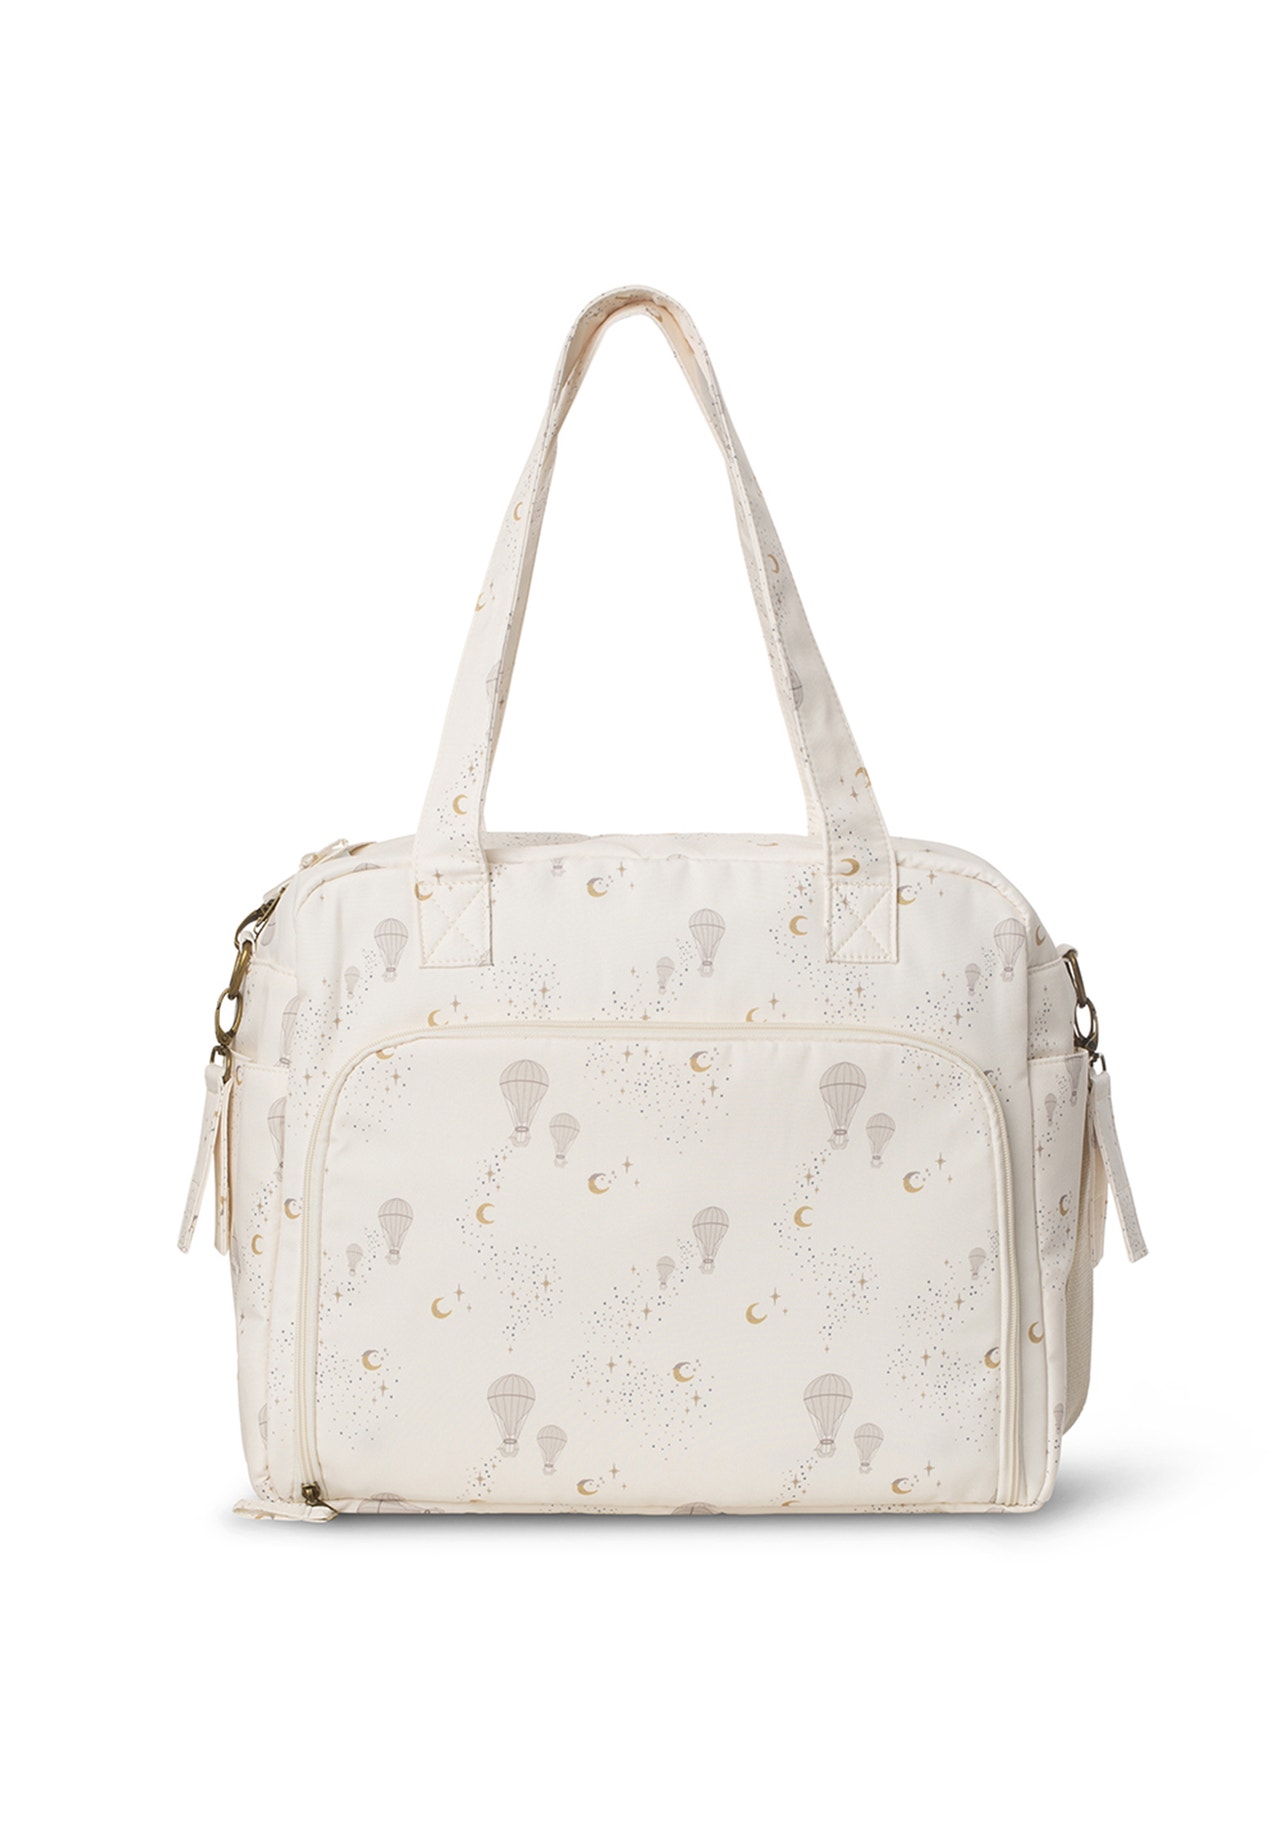 MAMA.LICIOUS Changing bag -Beige - 00033145